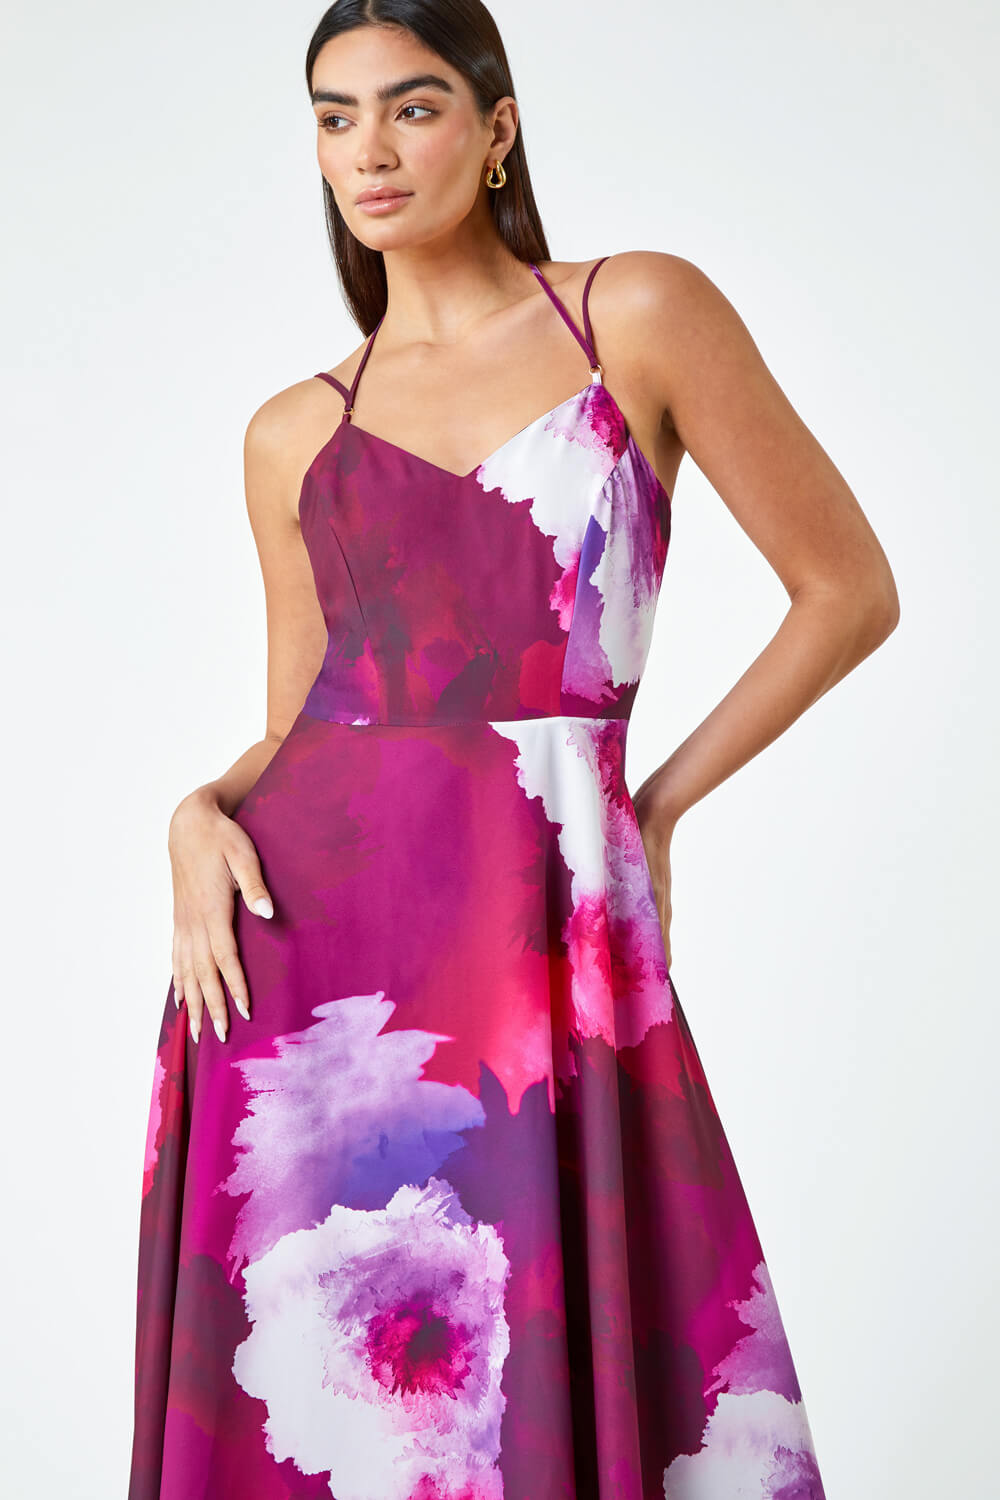 MAGENTA Luxe Floral Fit & Flare Maxi Dress, Image 4 of 5